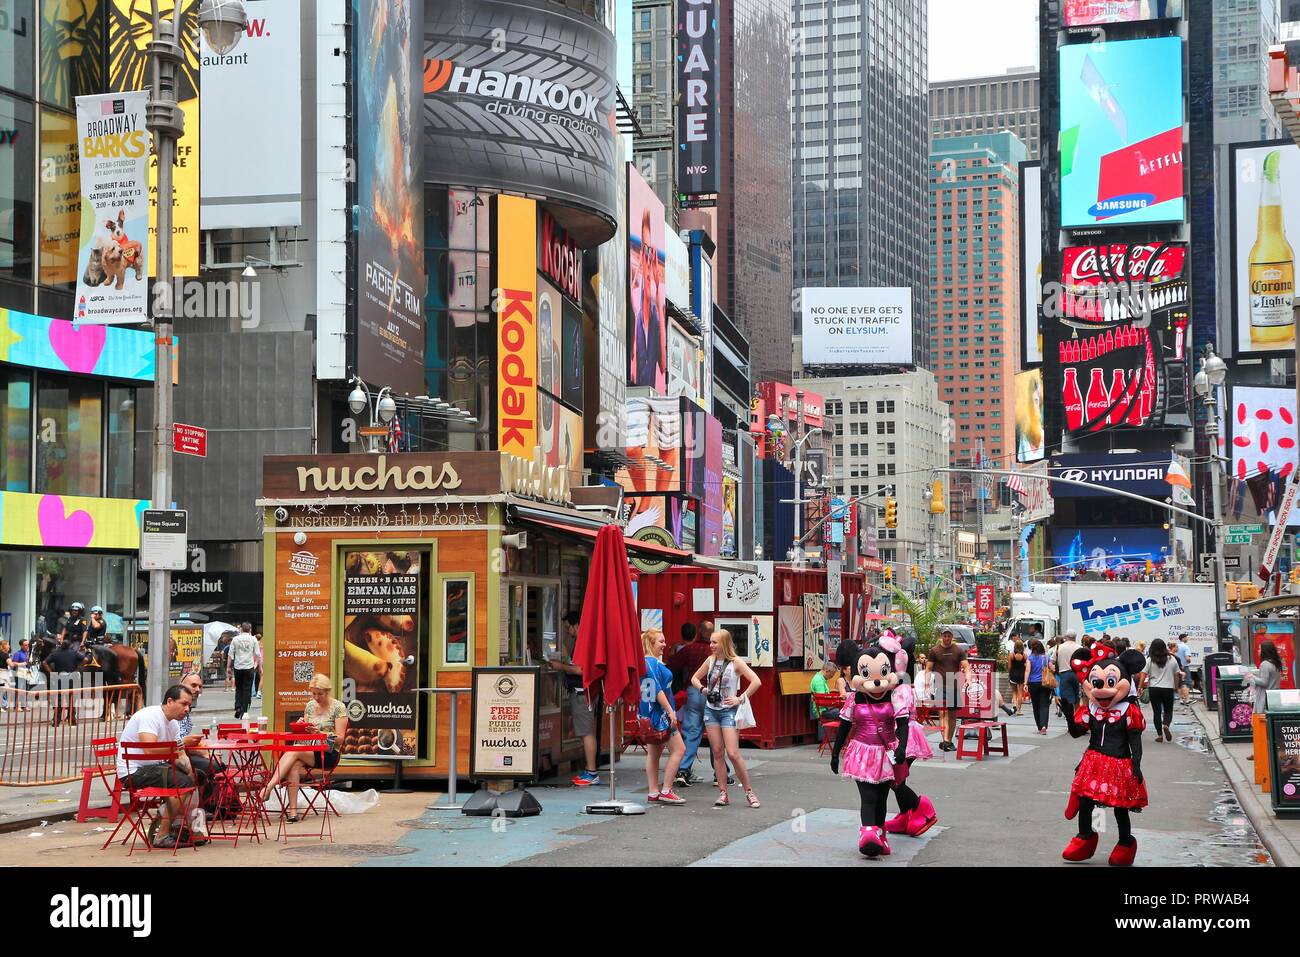 NEW YORK, USA - JULY 3, 2013: People visit Times Square in New York. Times Square is one of most recognized landmarks in the world. More than 300,000  Stock Photo